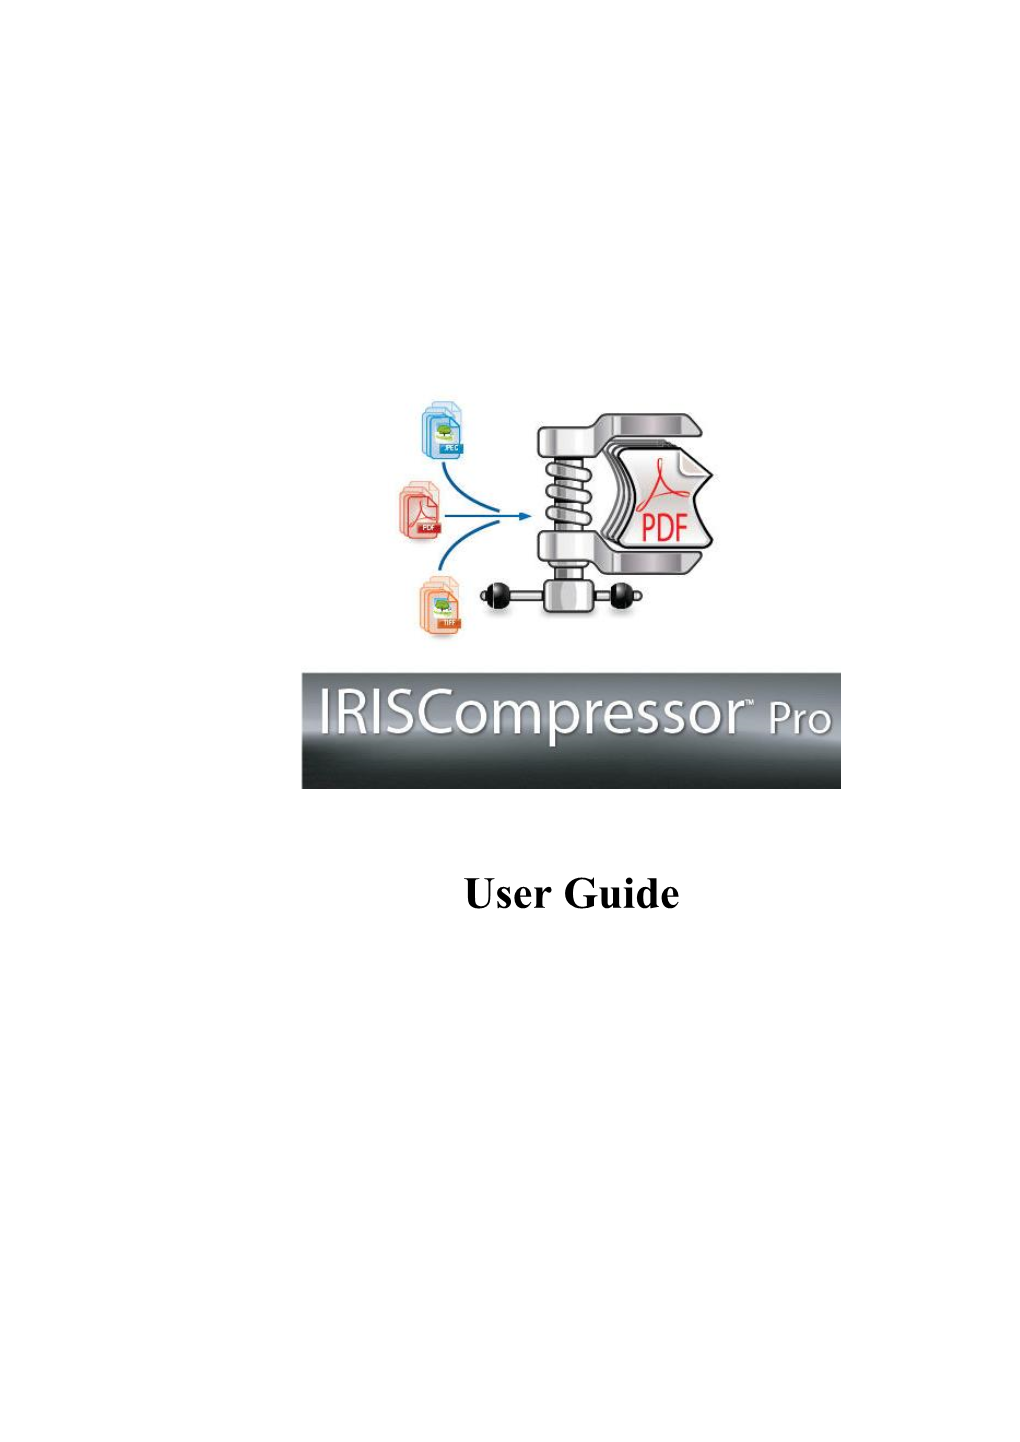 Iriscompressor Software and to This Publication